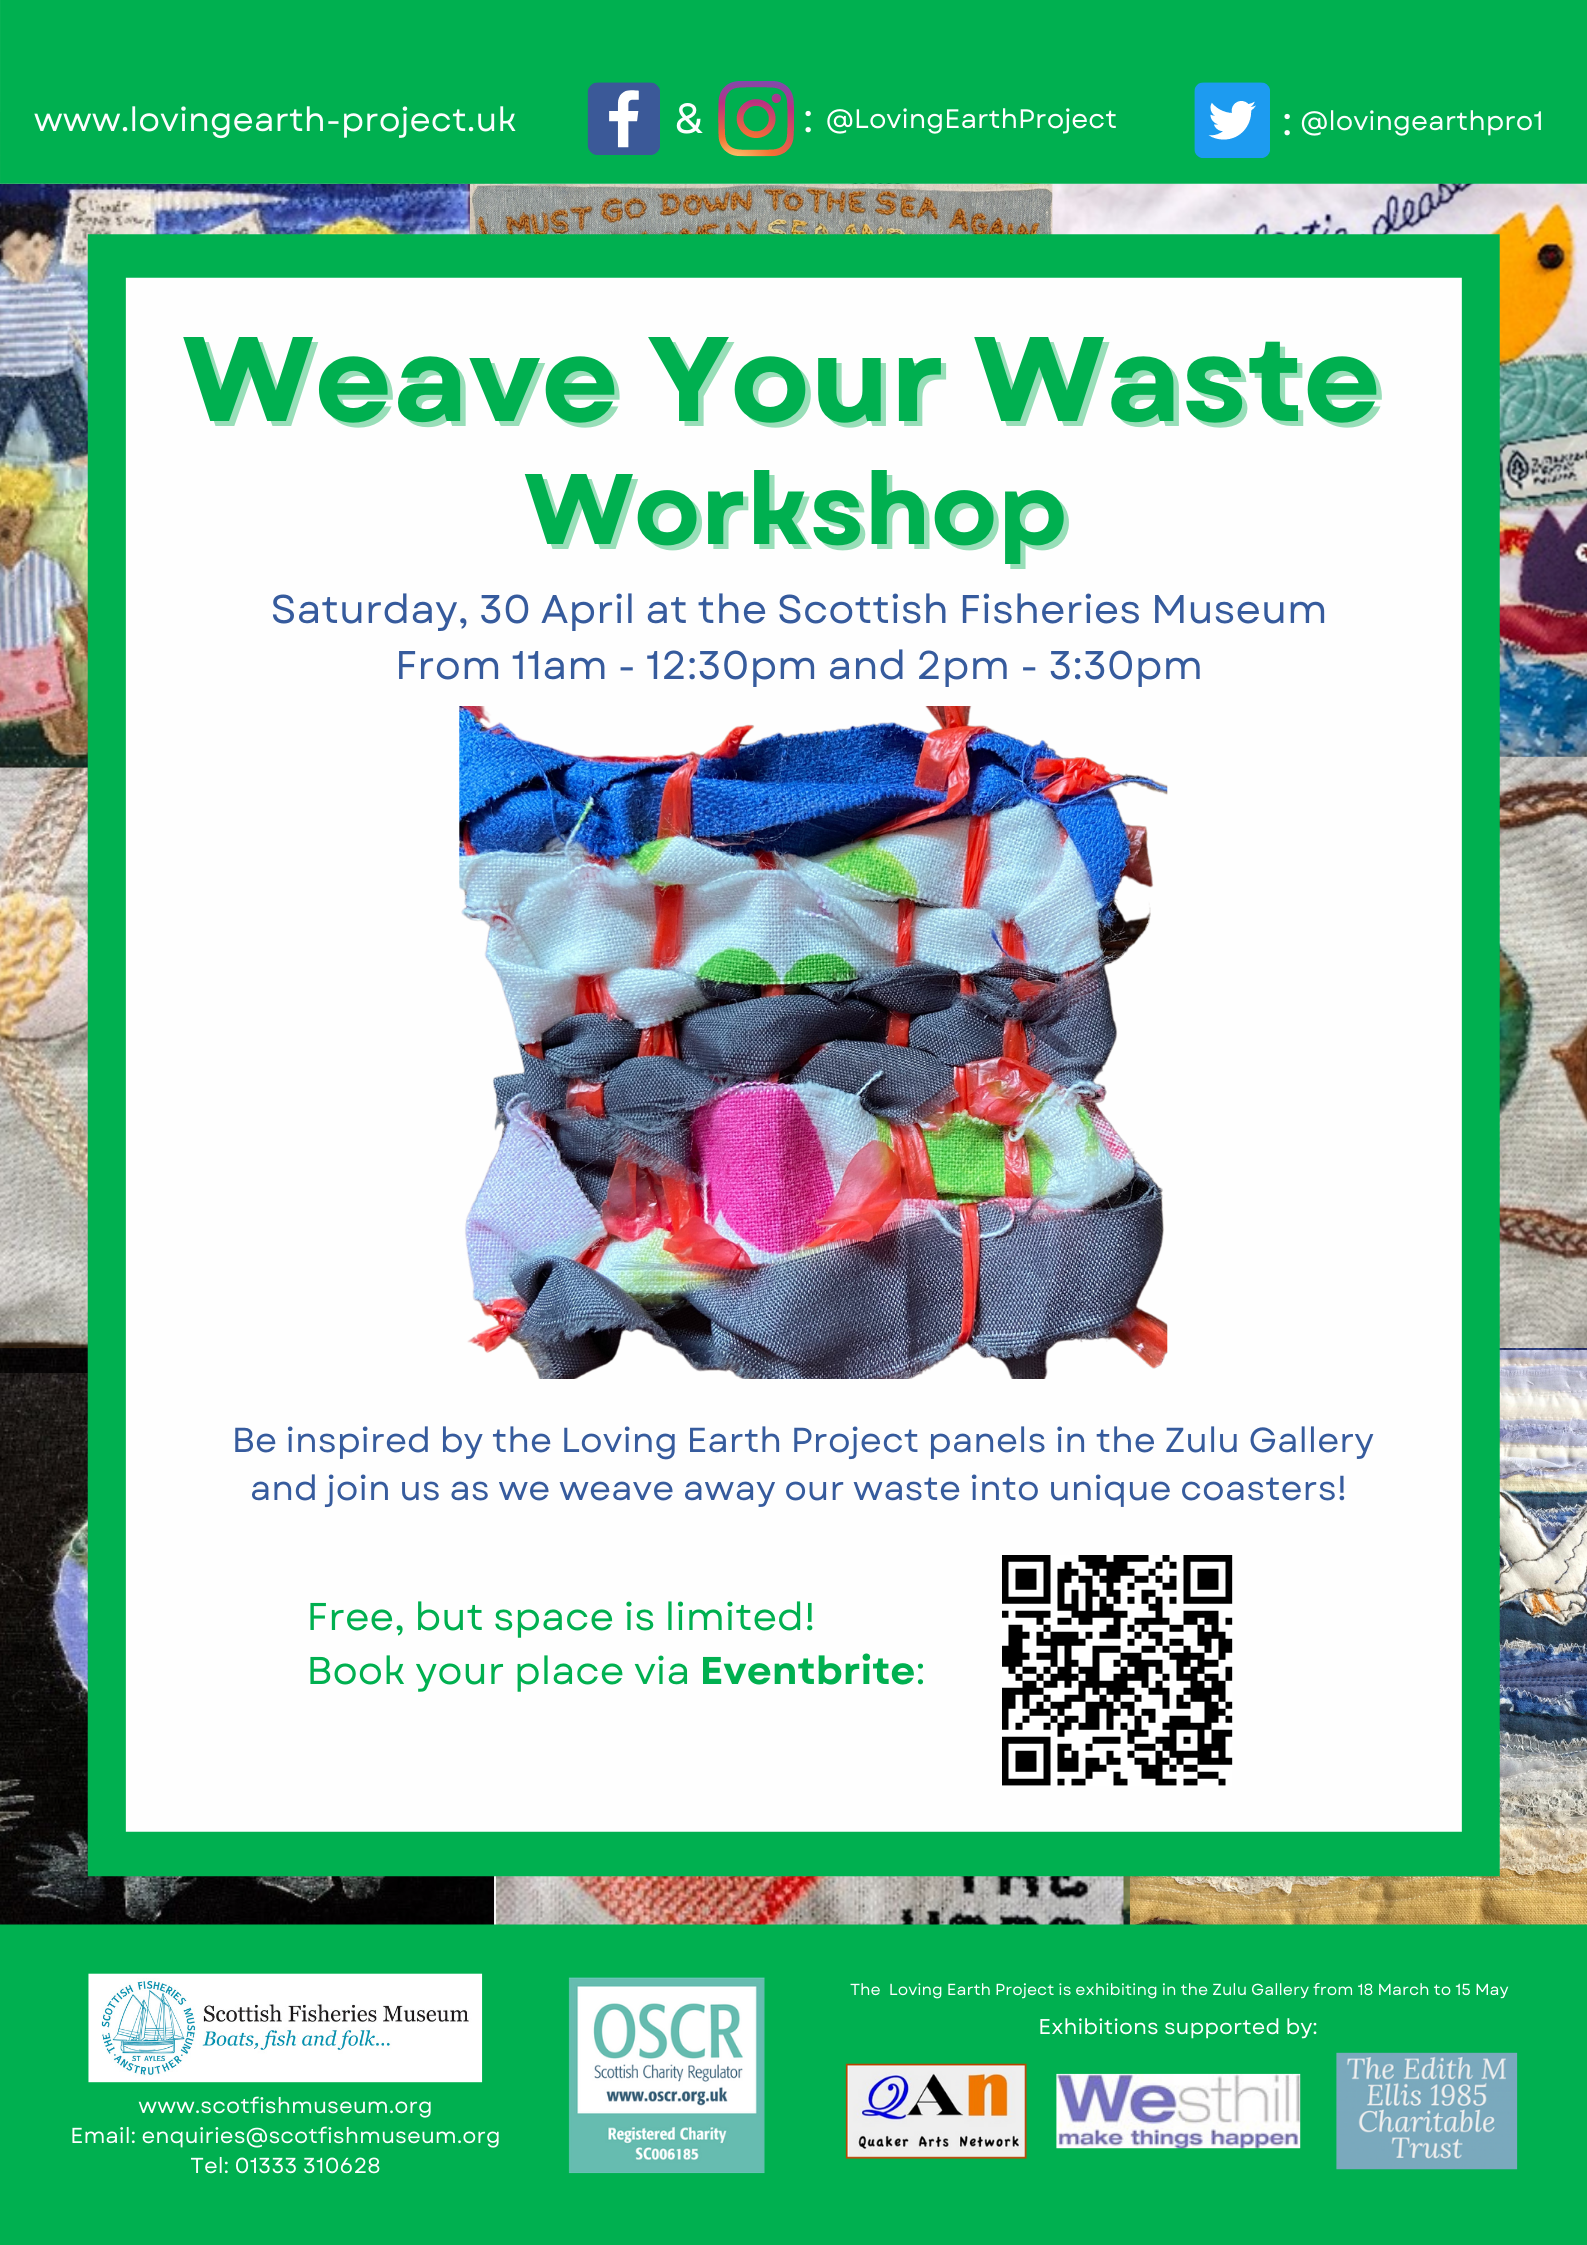 Weave Your Waste!